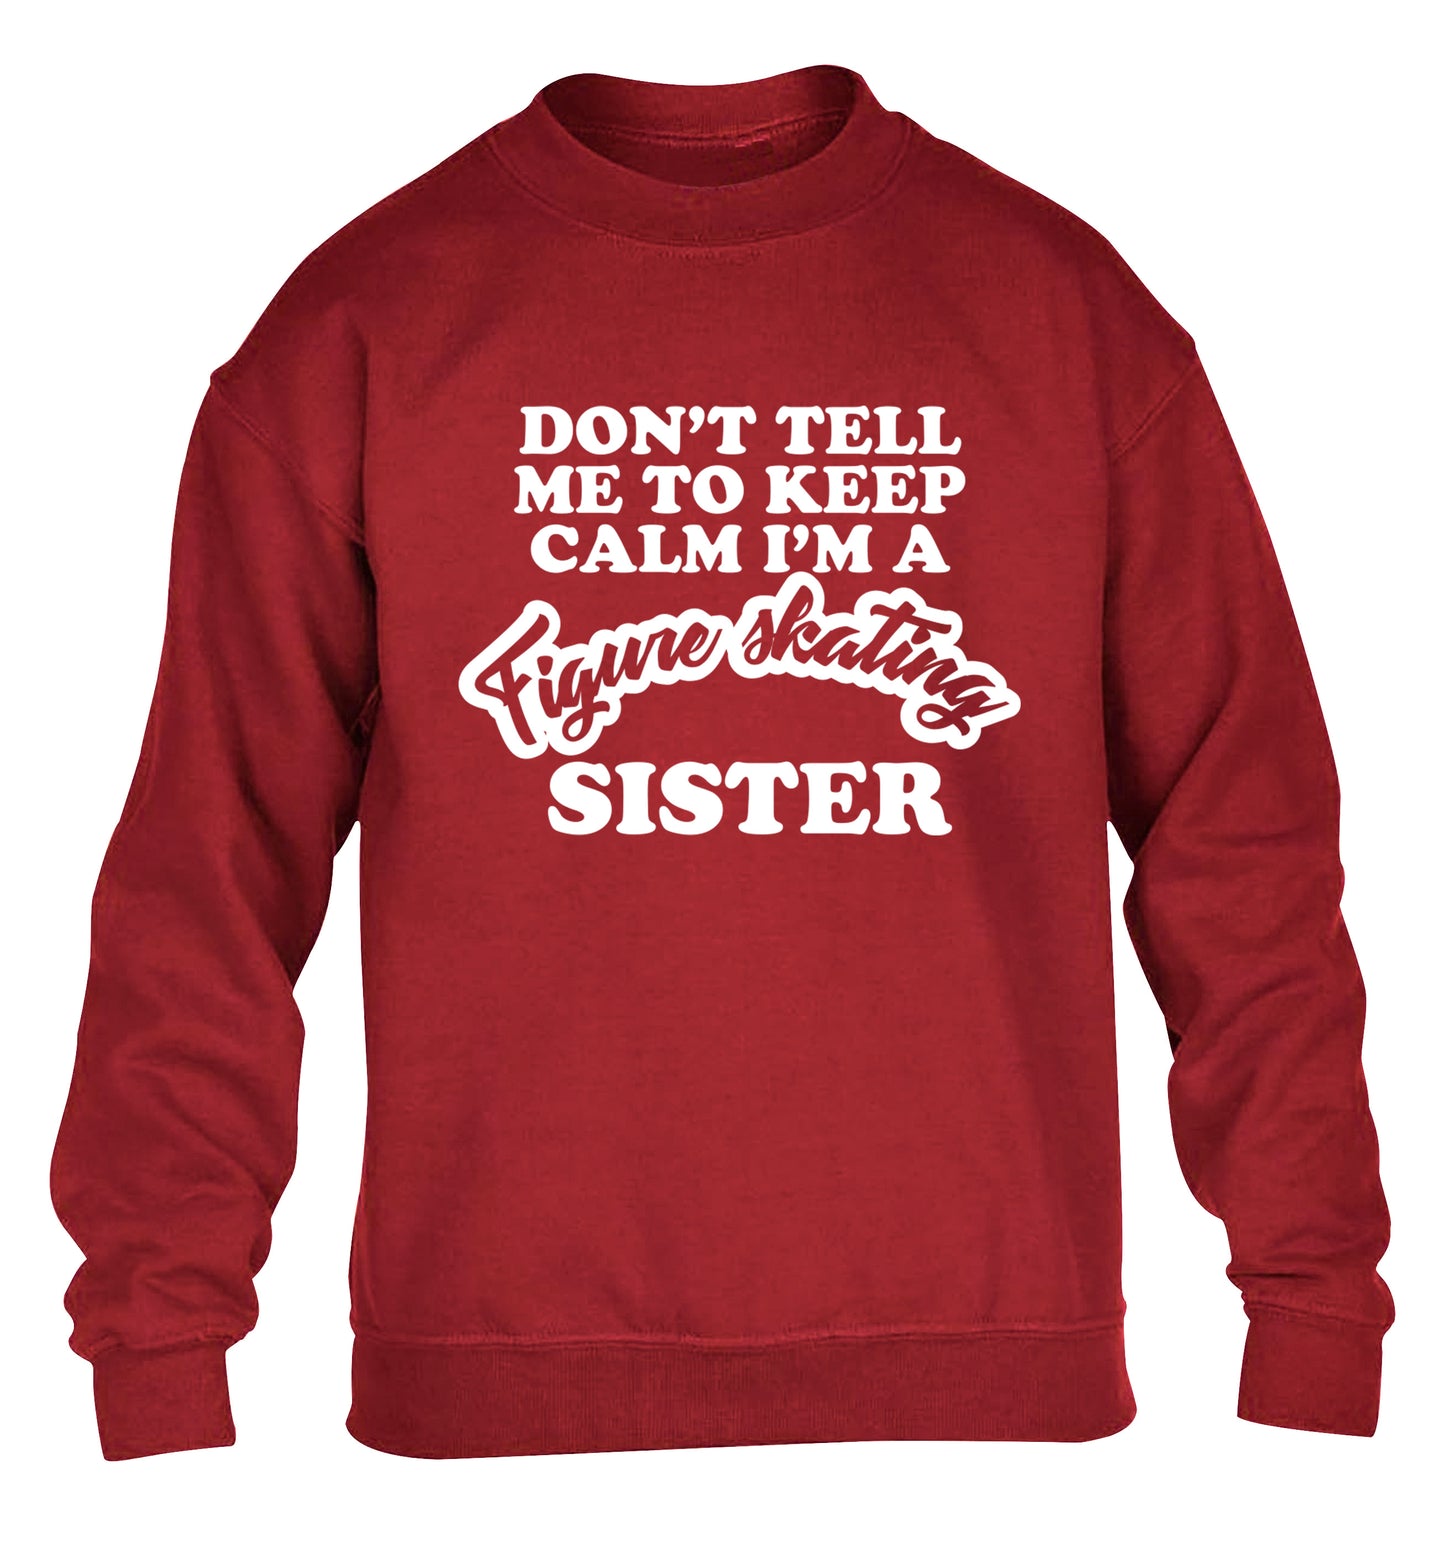 Don't tell me to keep calm I'm a figure skating sister children's grey sweater 12-14 Years